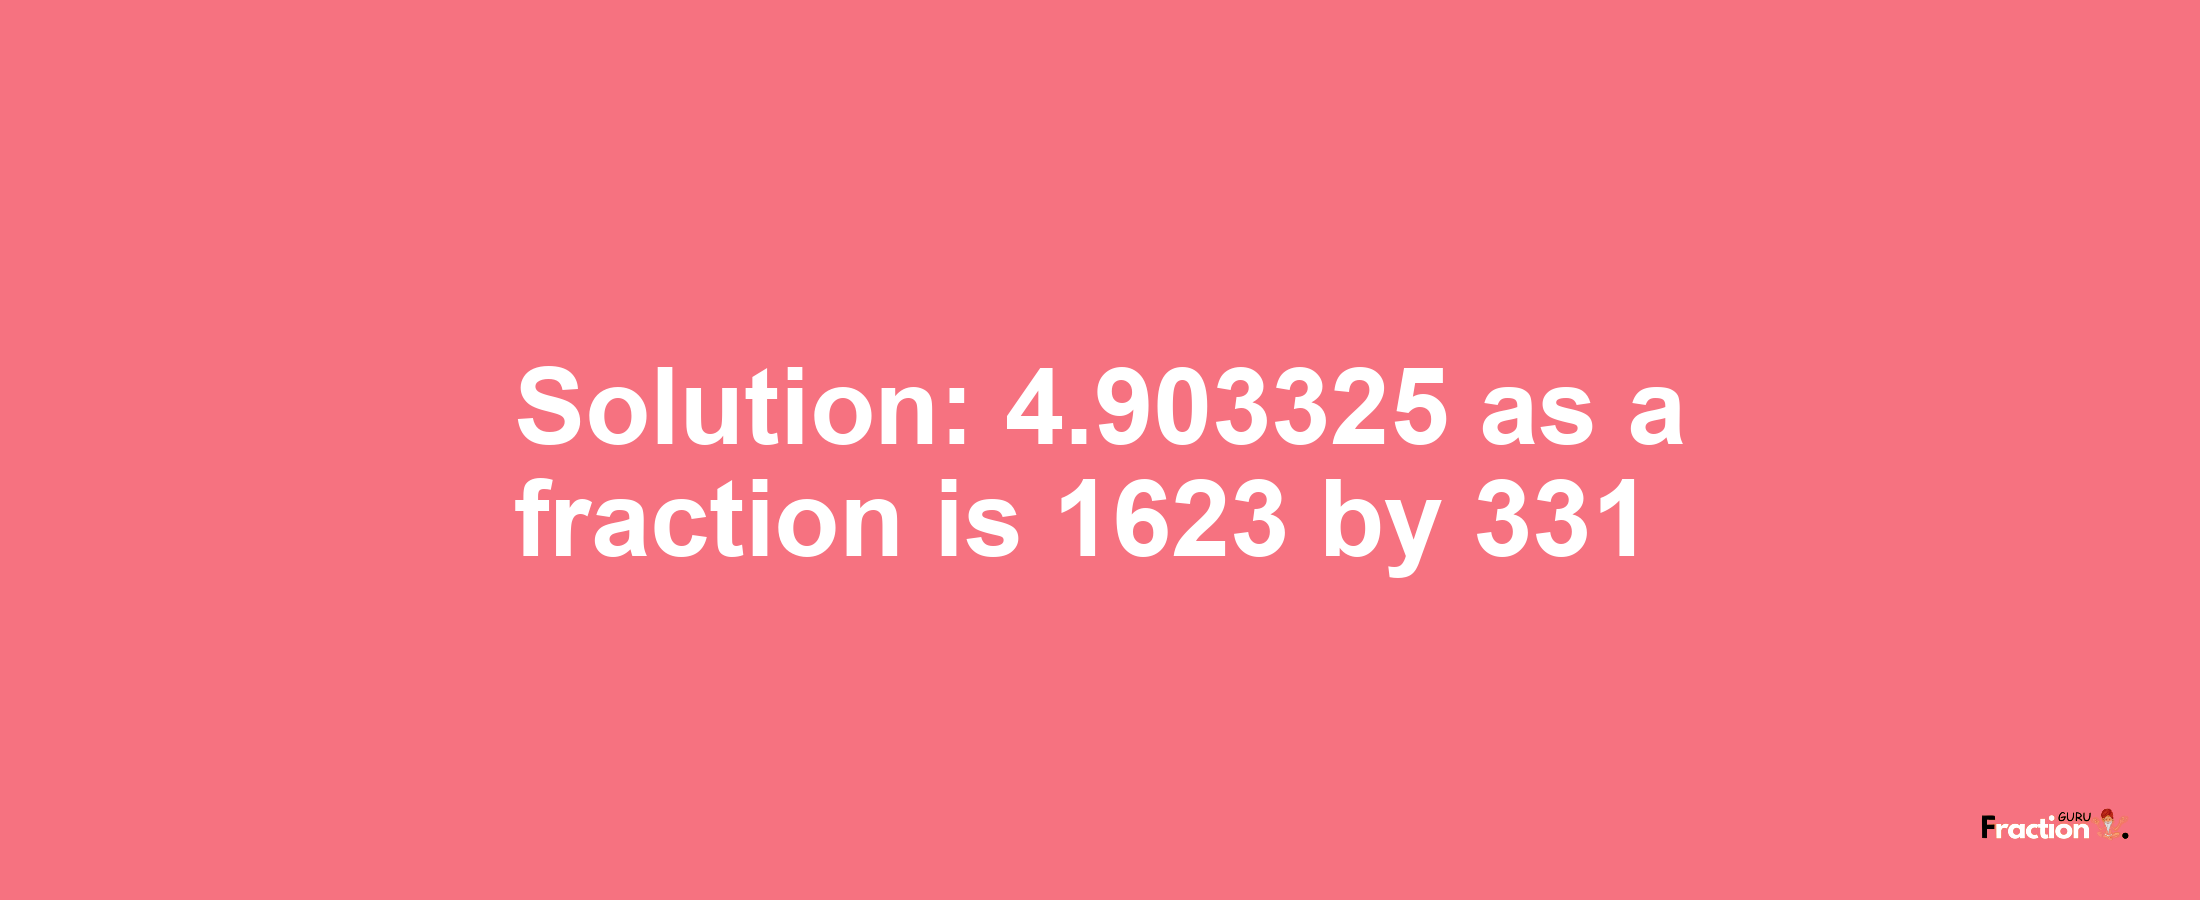 Solution:4.903325 as a fraction is 1623/331